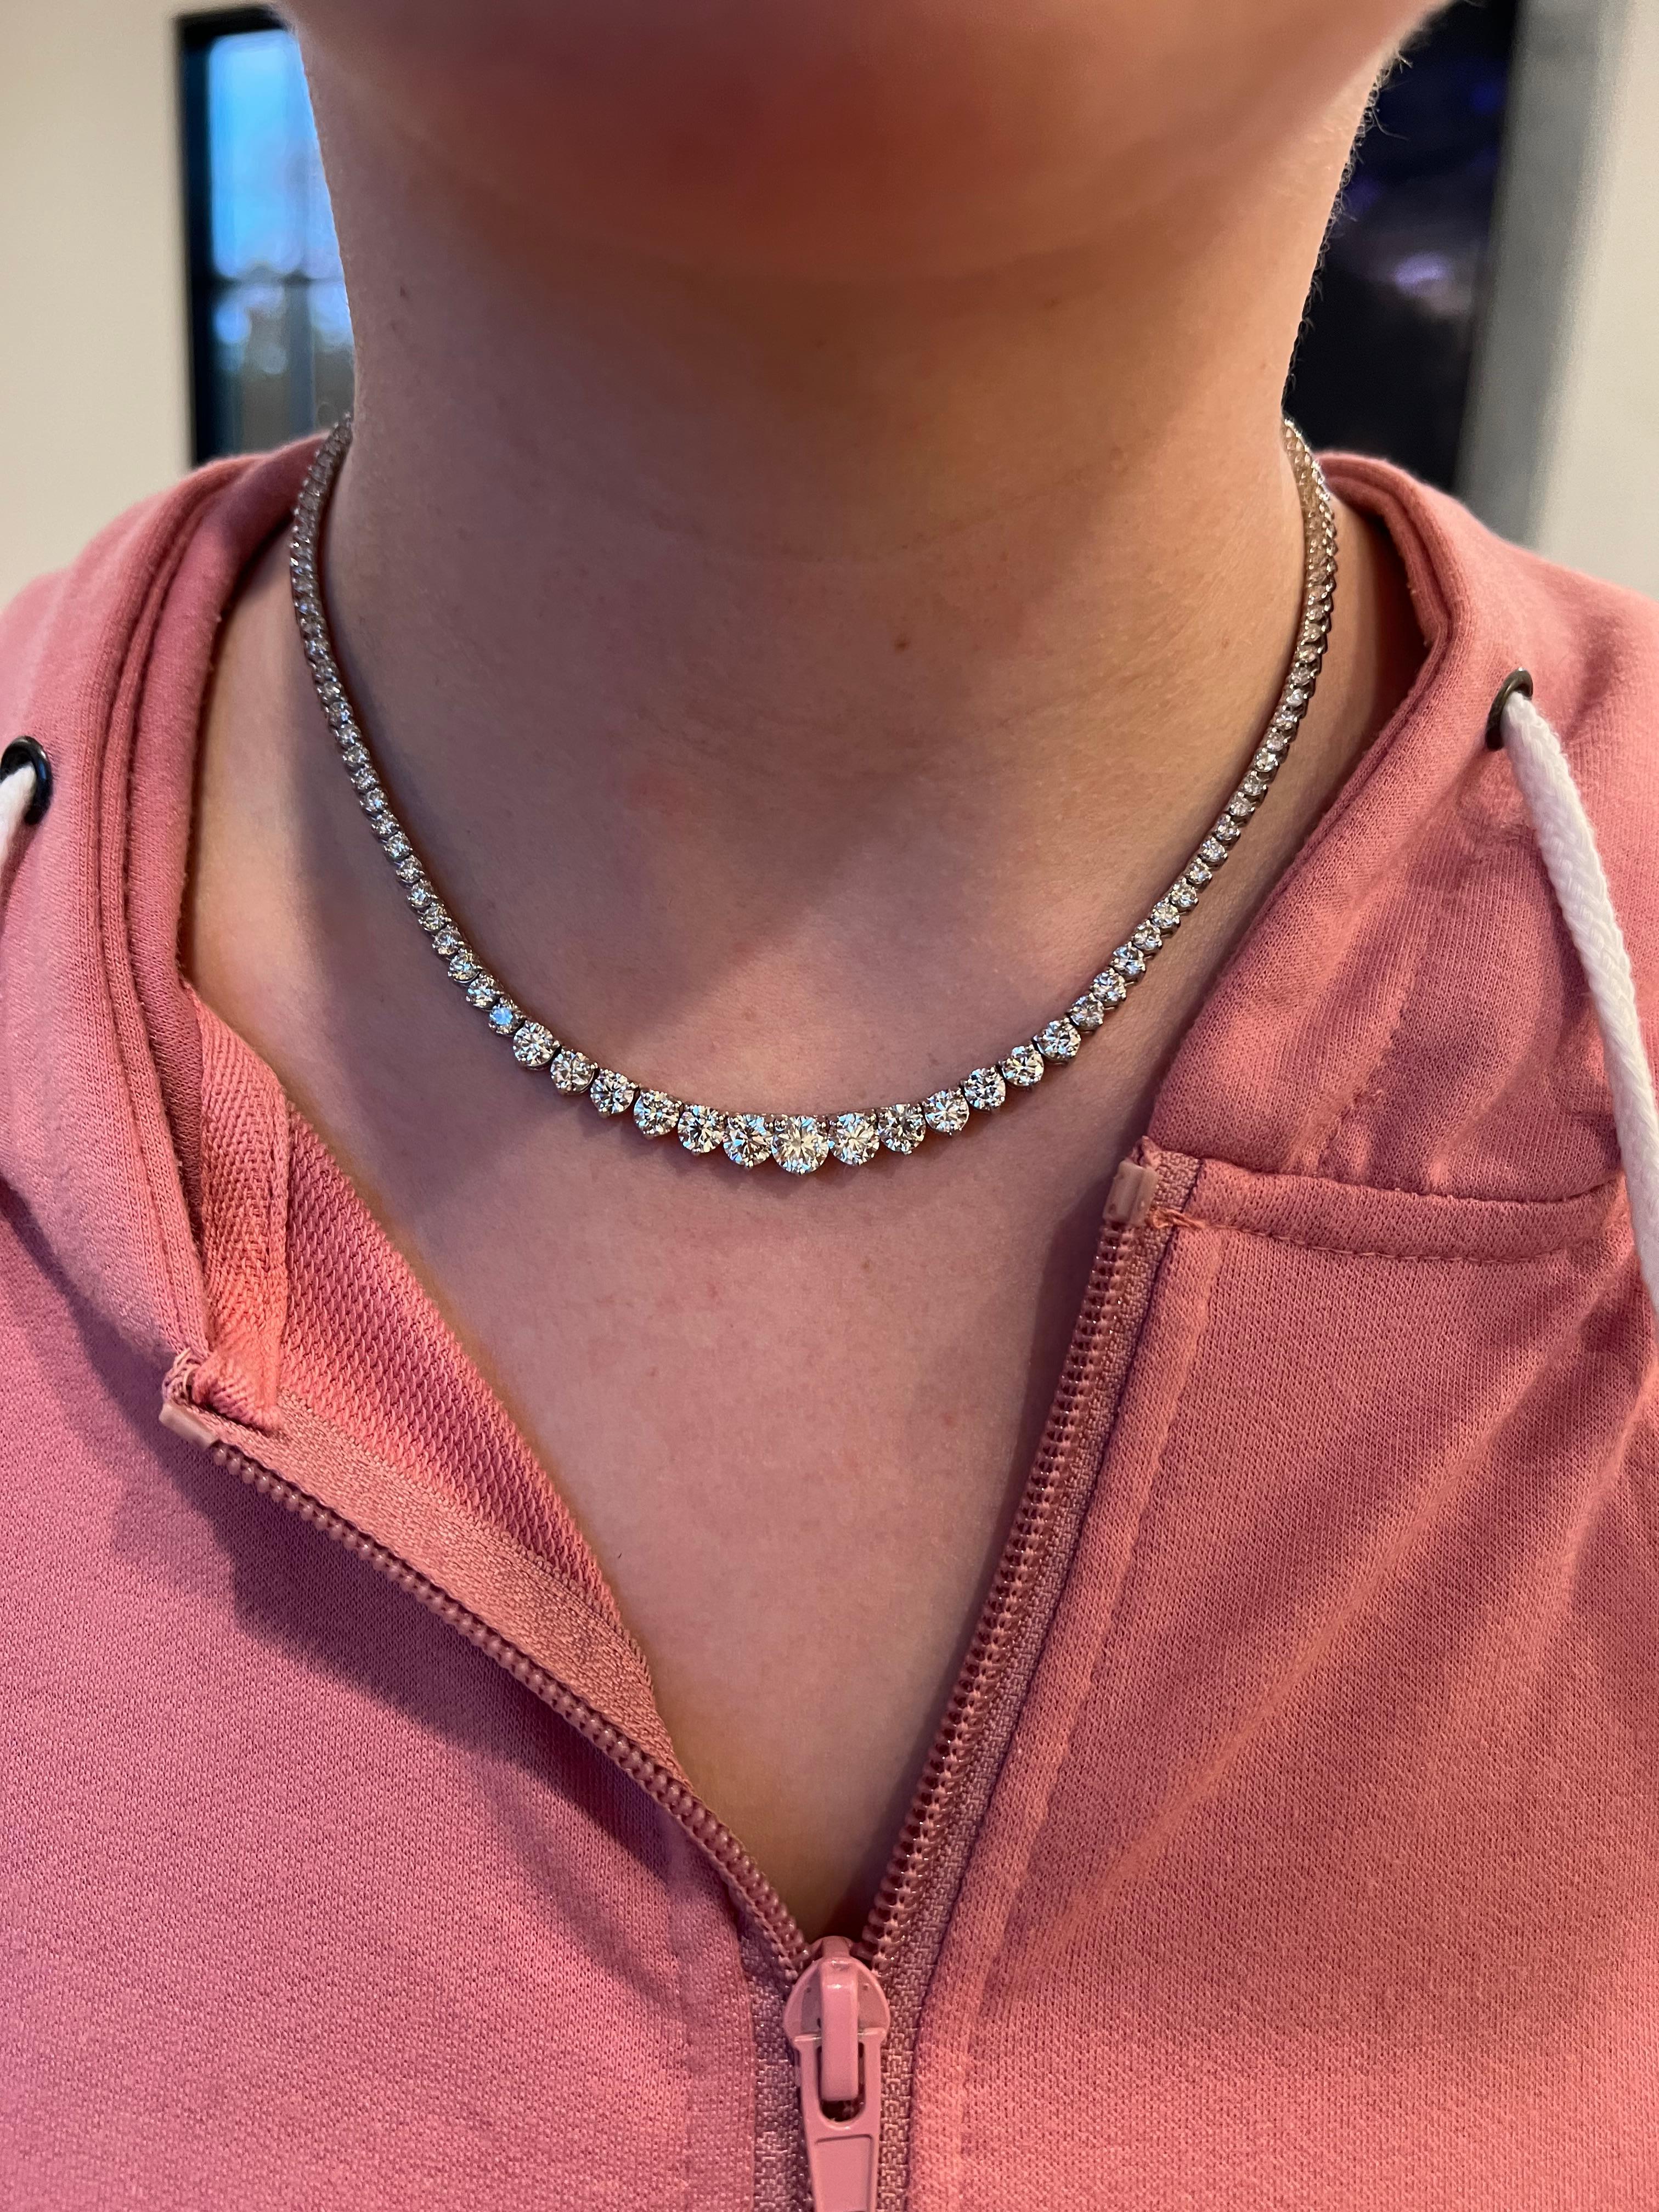 Expertly crafted from premium quality diamonds, this necklace boasts a stunning graduated elegant, sophisticated, and classic design. Each diamond in this tennis necklace has been carefully selected for its brilliance and clarity, ensuring it